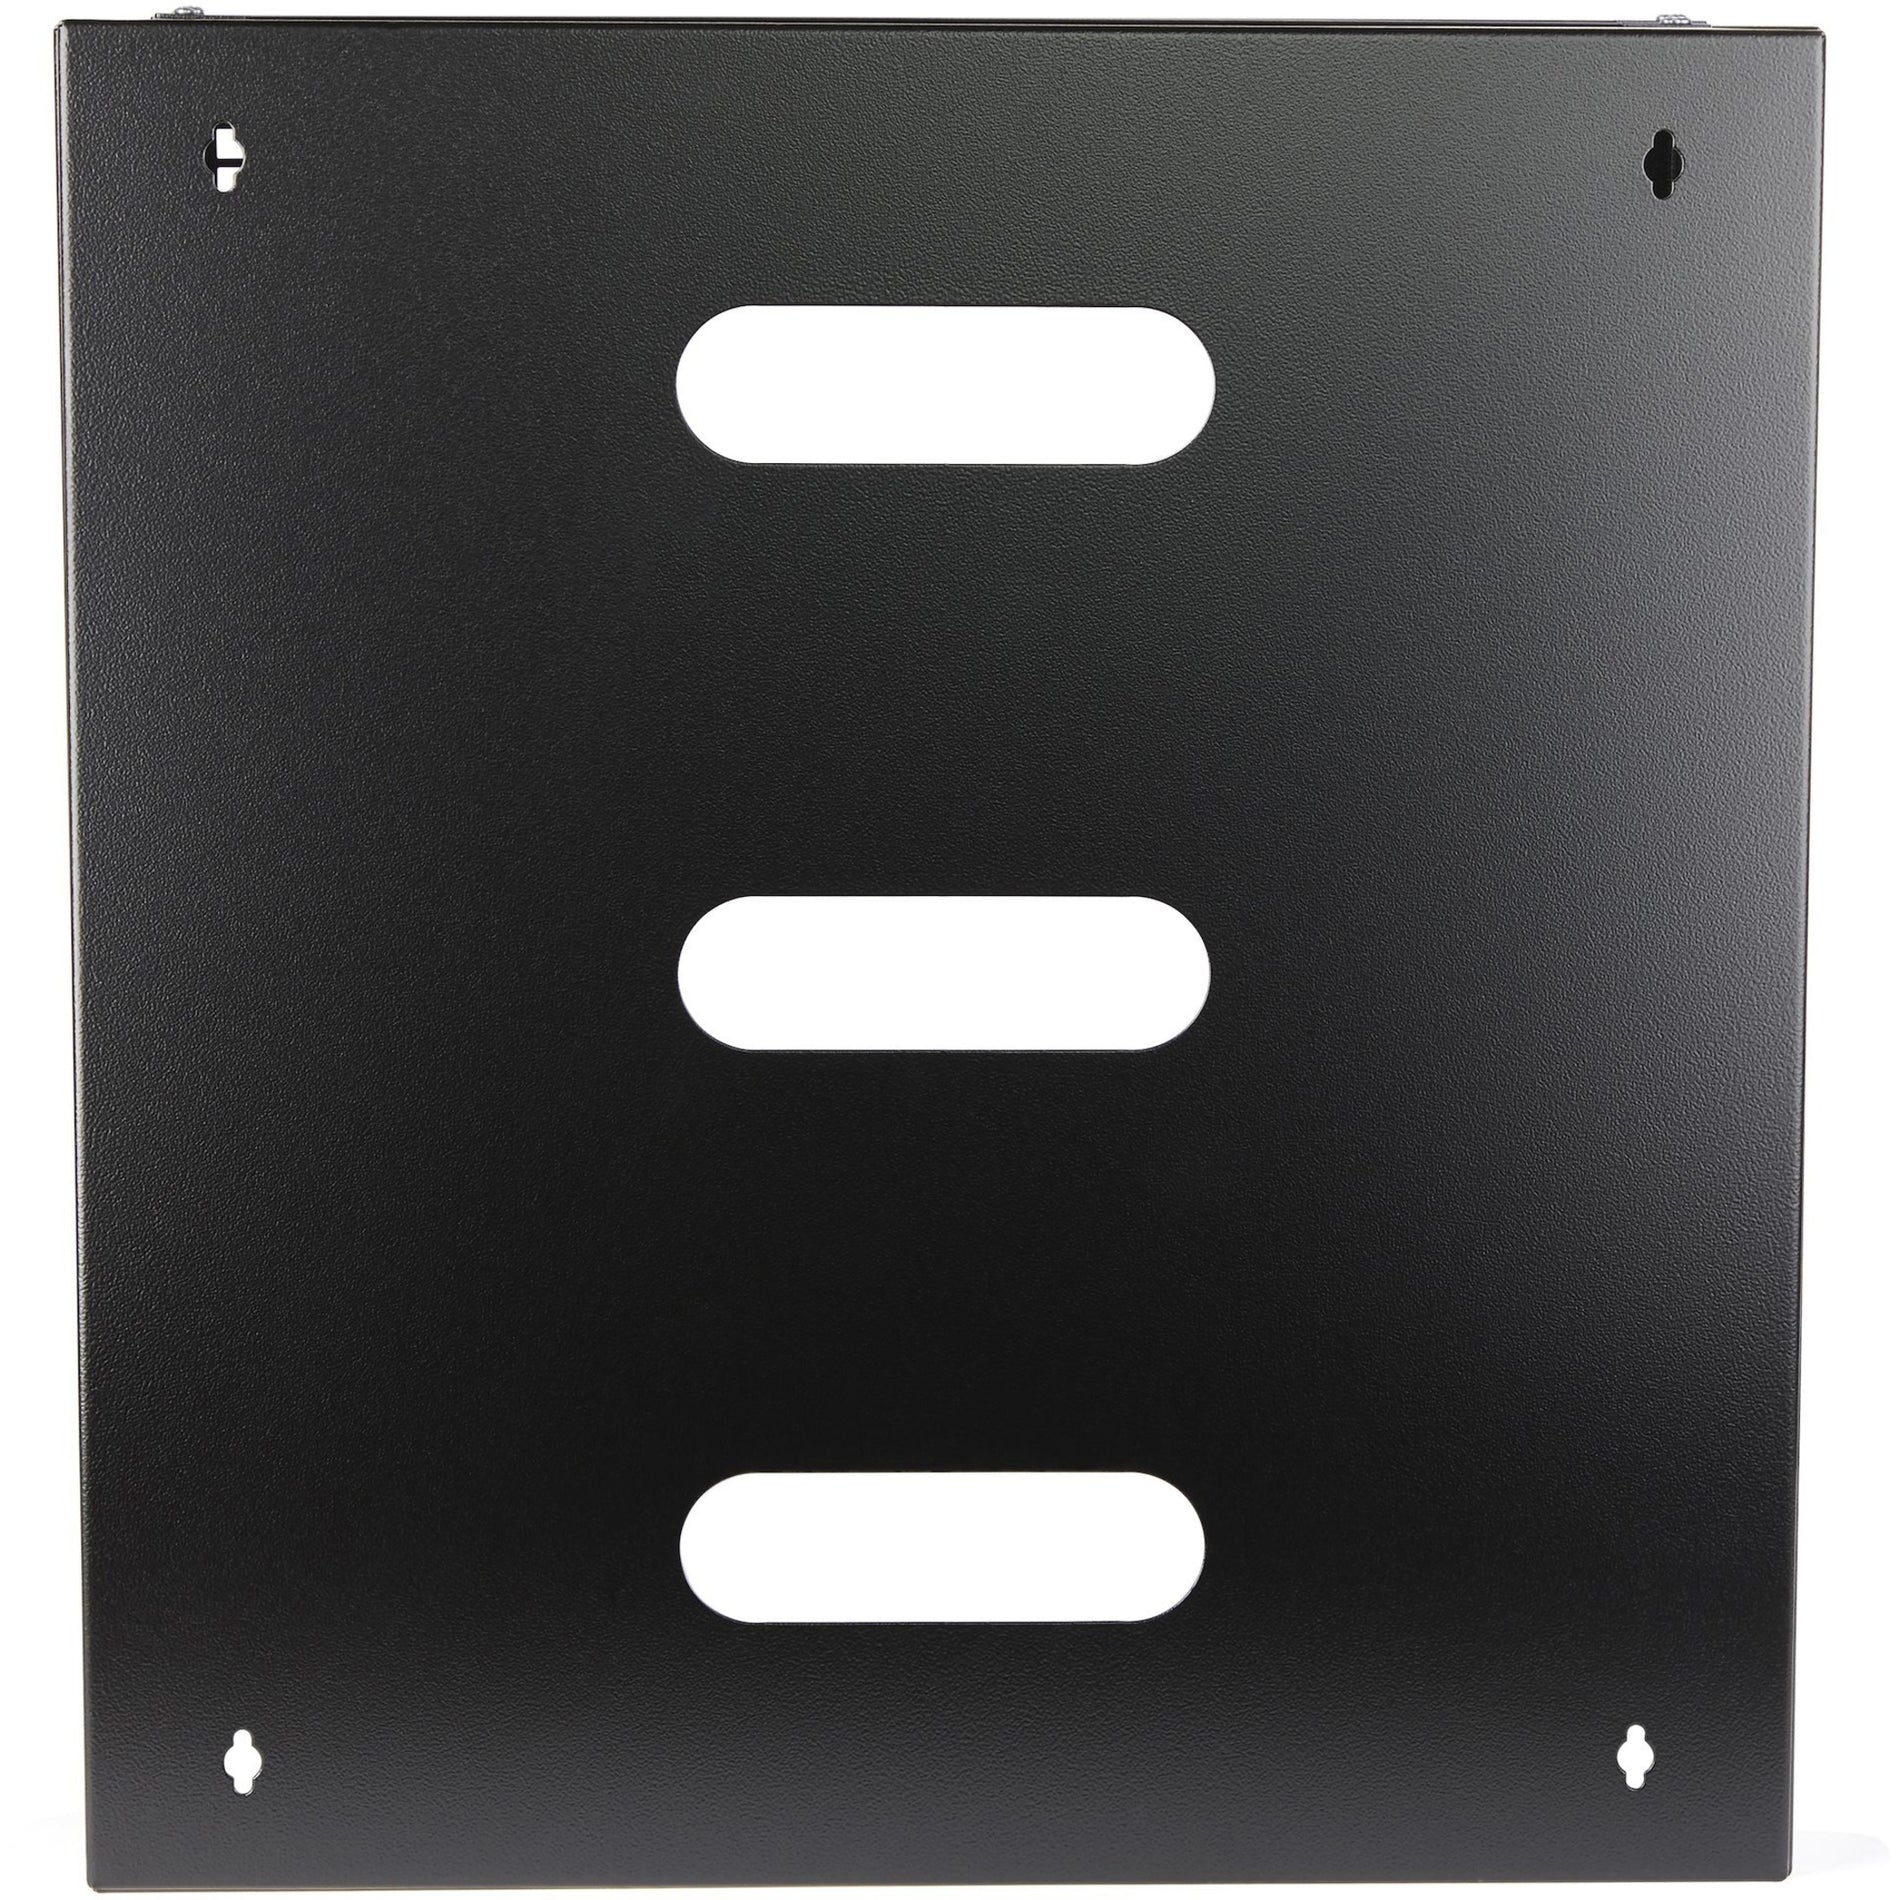 StarTech.com WALLMNT12 12U Wall-Mount Bracket for Shallow Rack-Mount Equipment - Solid Steel, Mount Patch Panels or Network Switches up to 12 inches Deep